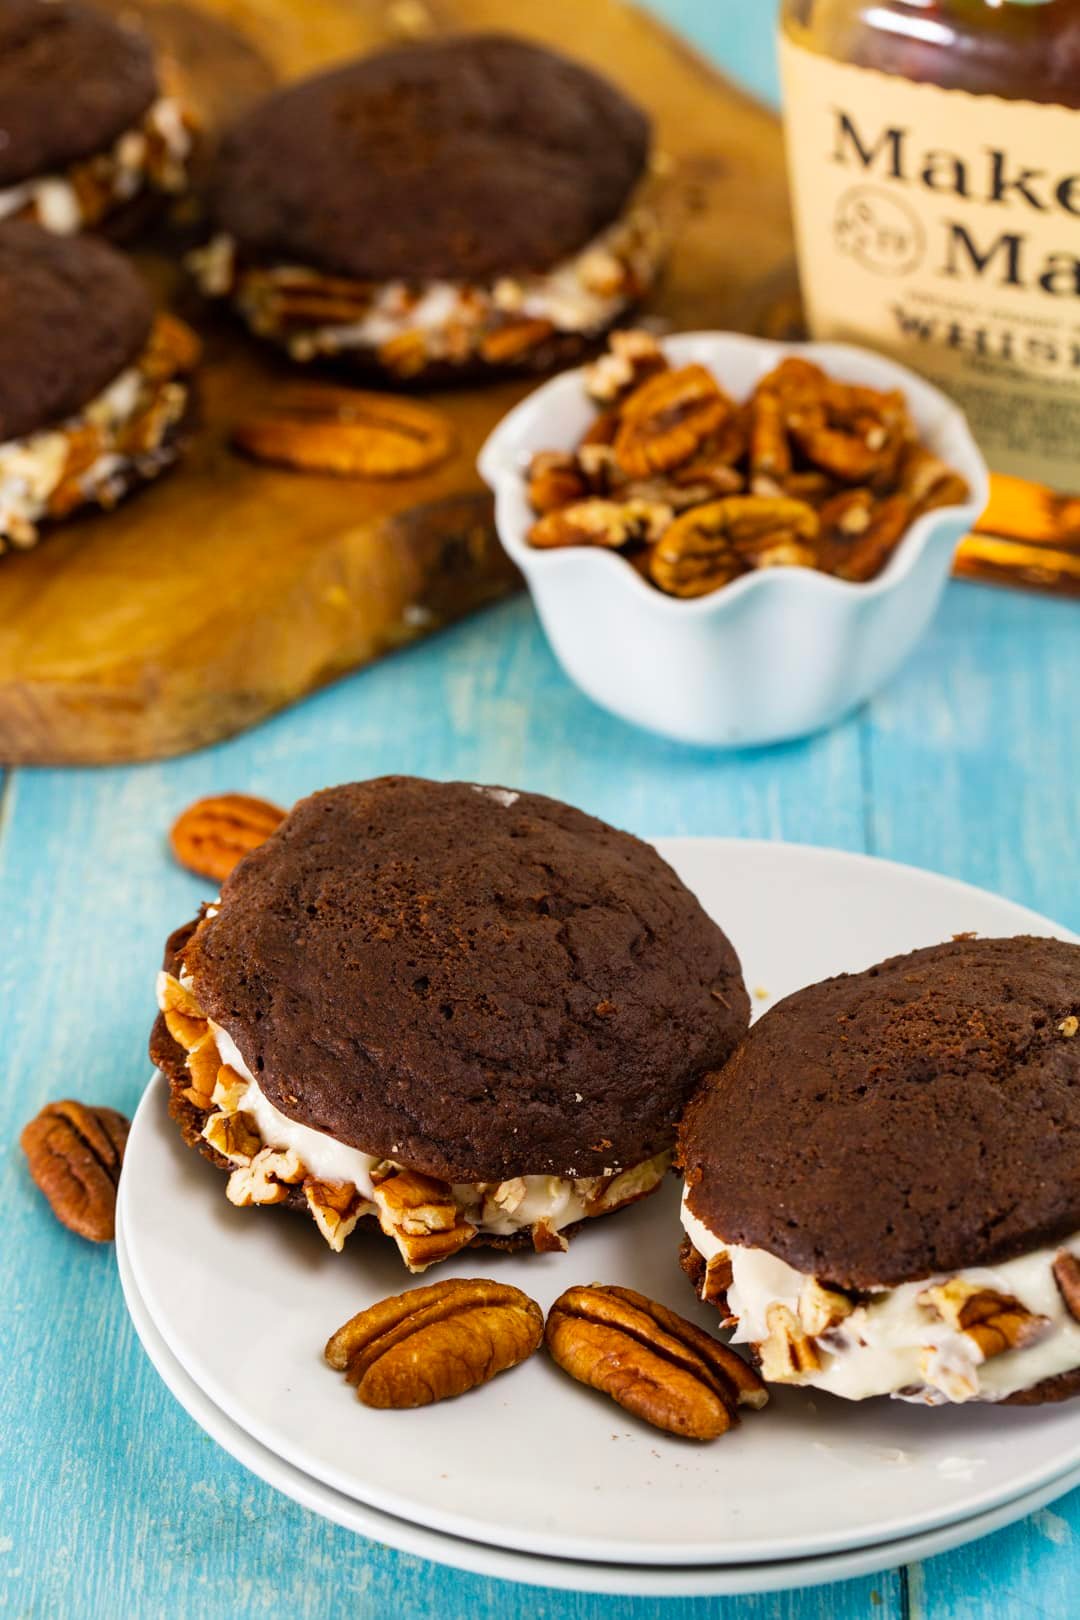 Whoopie Pies and bowl of pecans.